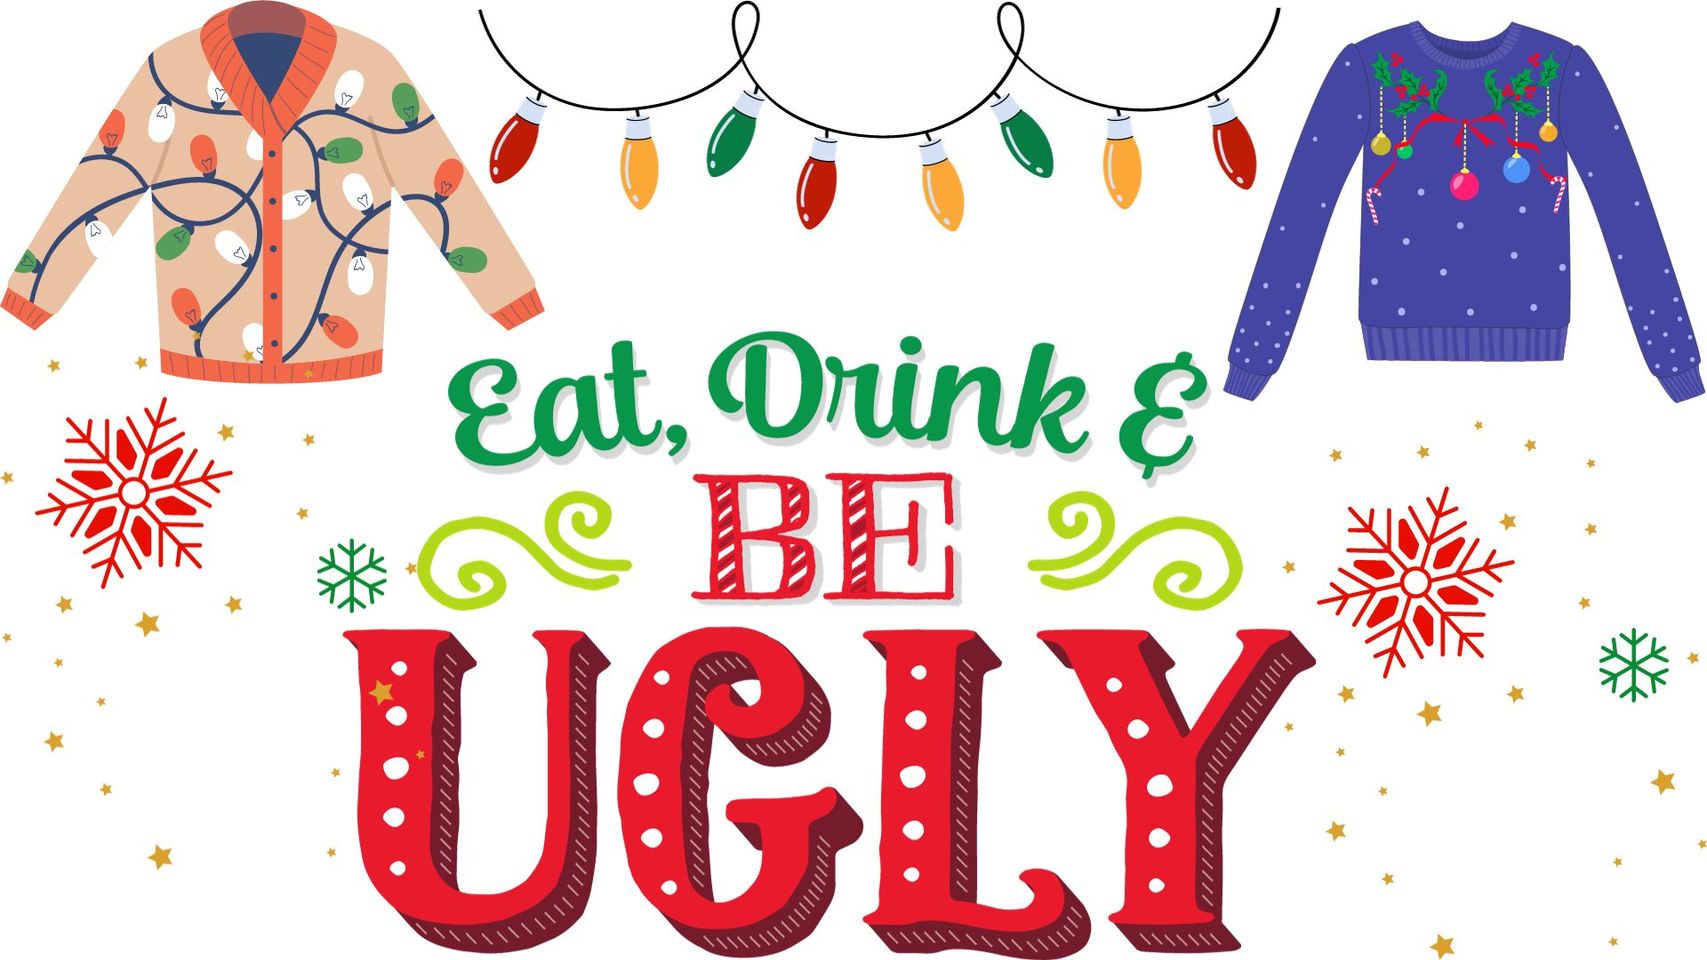 eat drink and be ugly